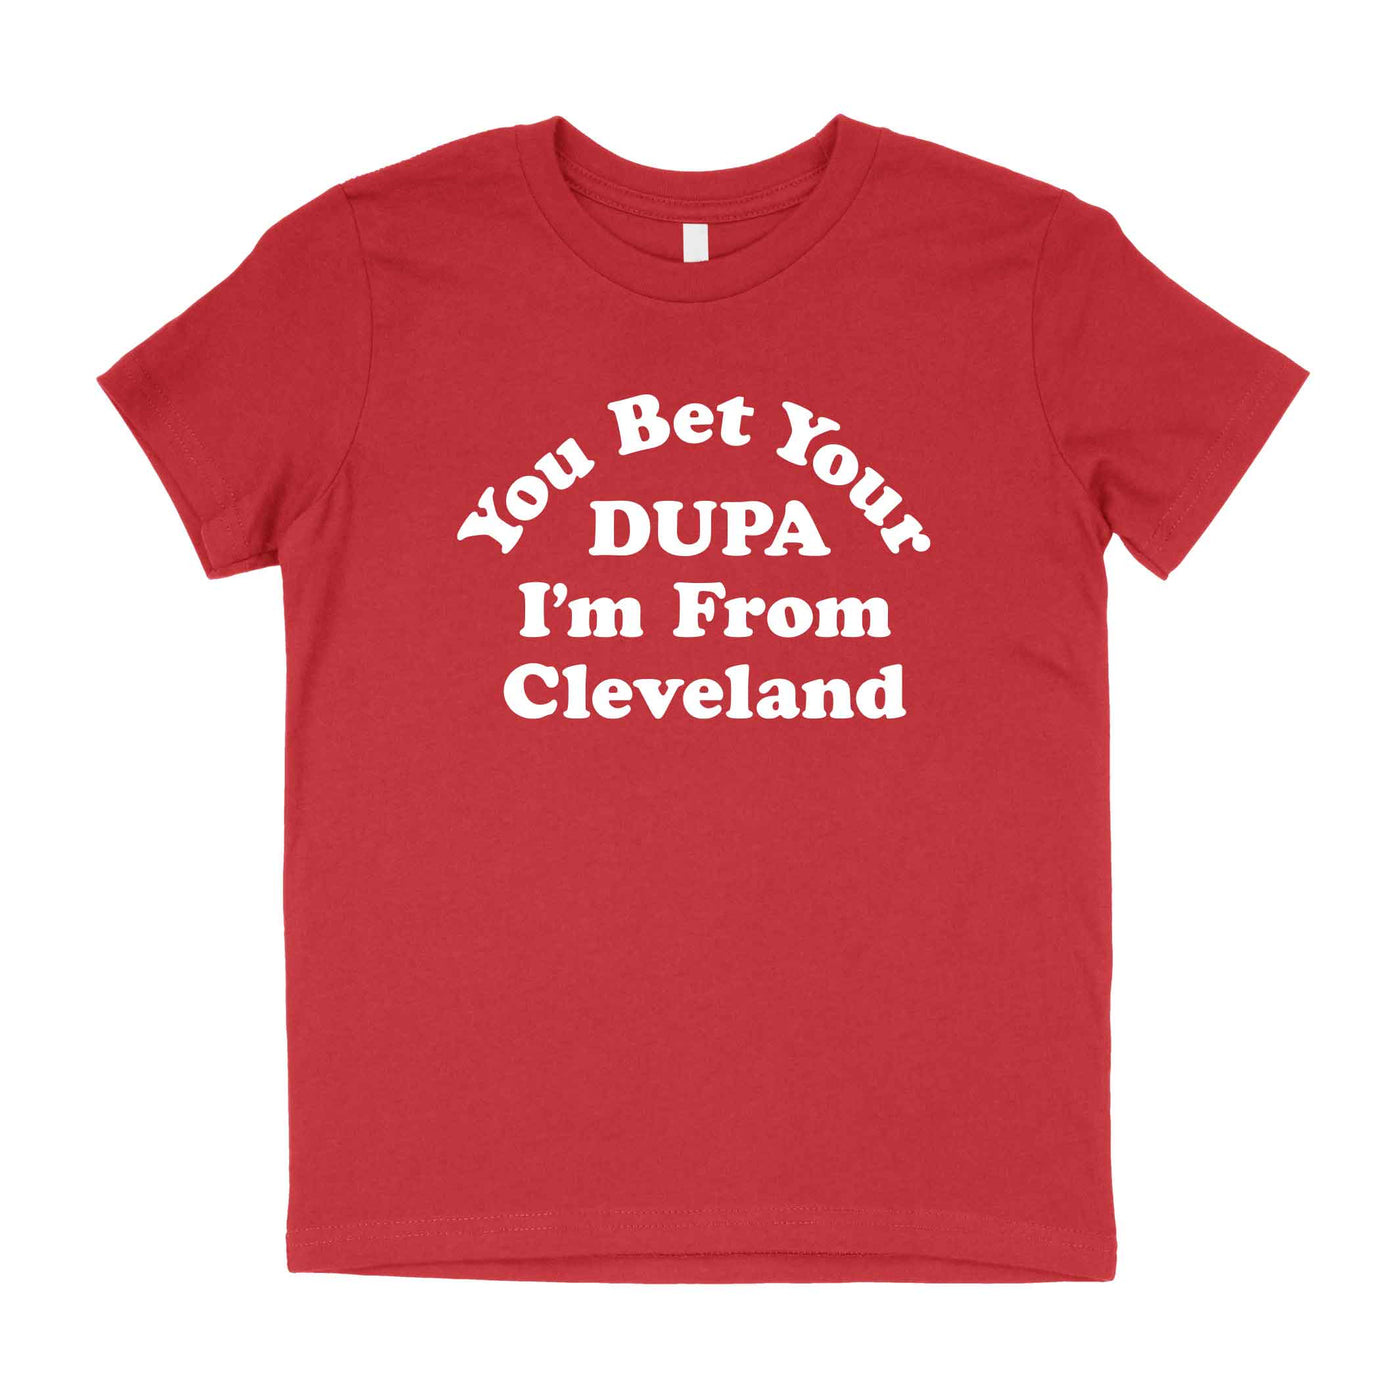 You Bet Your Dupa Youth T-Shirt